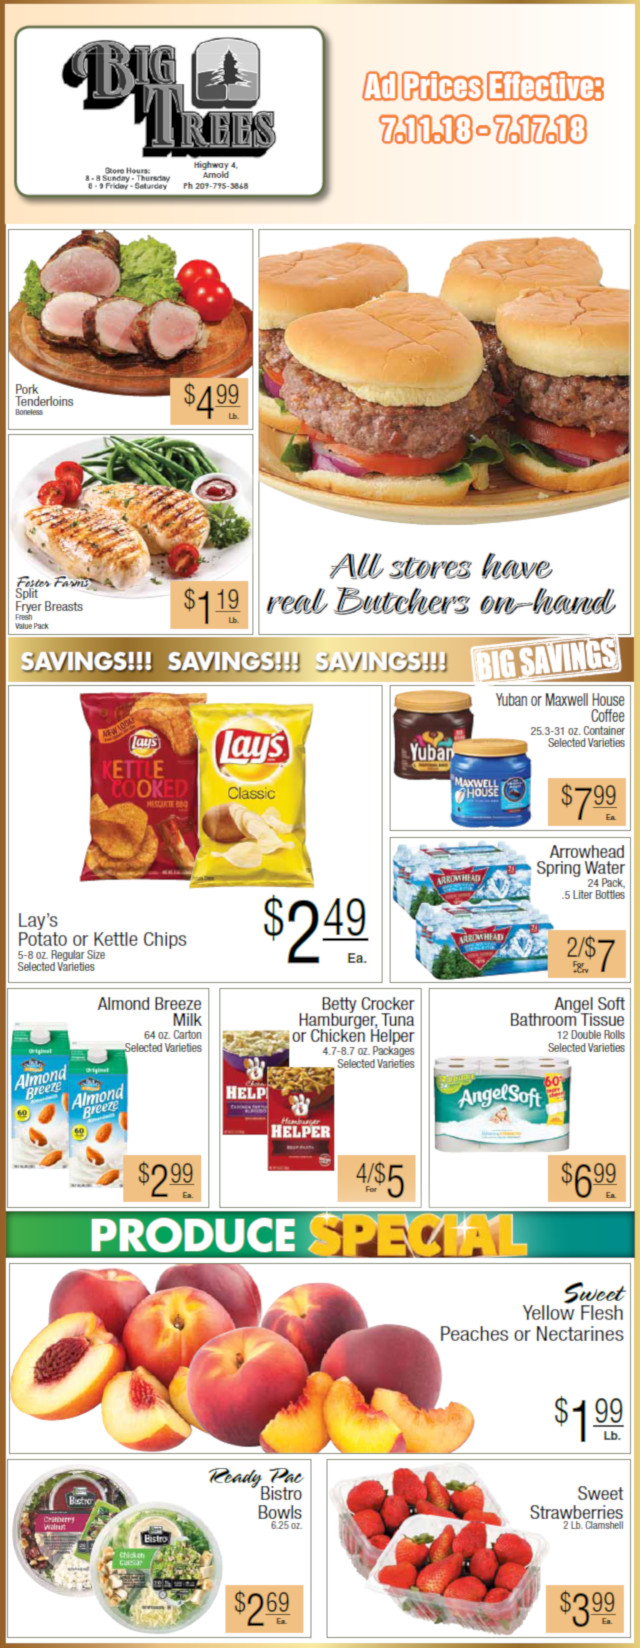 Big Trees Market Weekly Ad & Grocery Specials Through July 17th